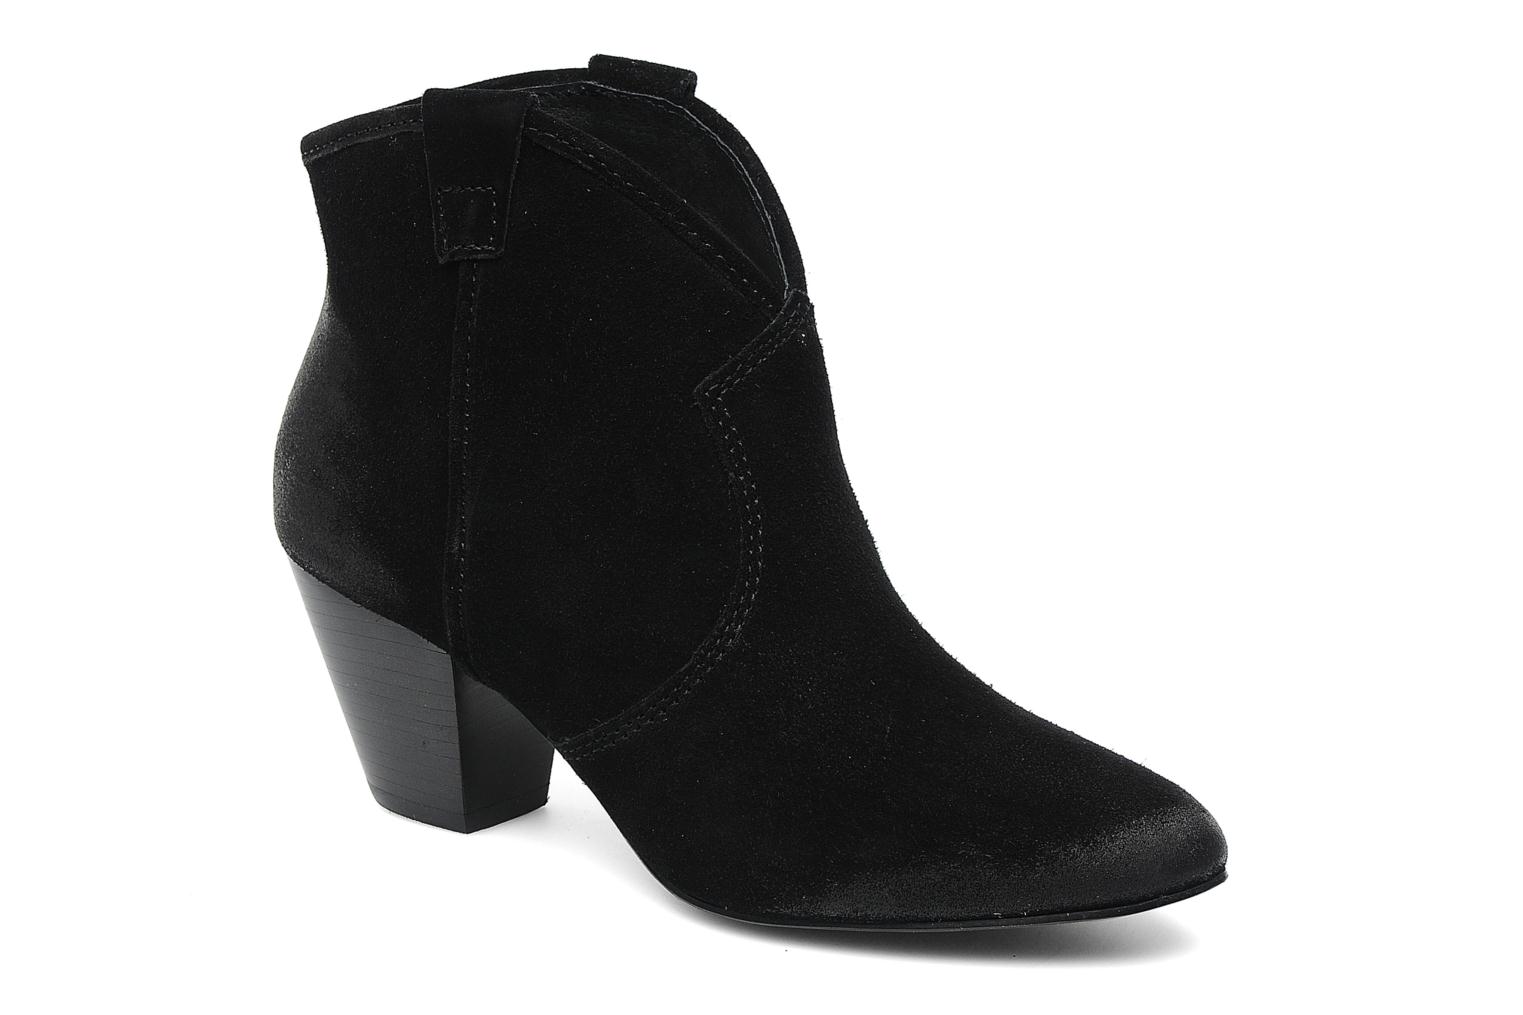 Ash Jalouse Ankle boots in Black at Sarenza (148286)